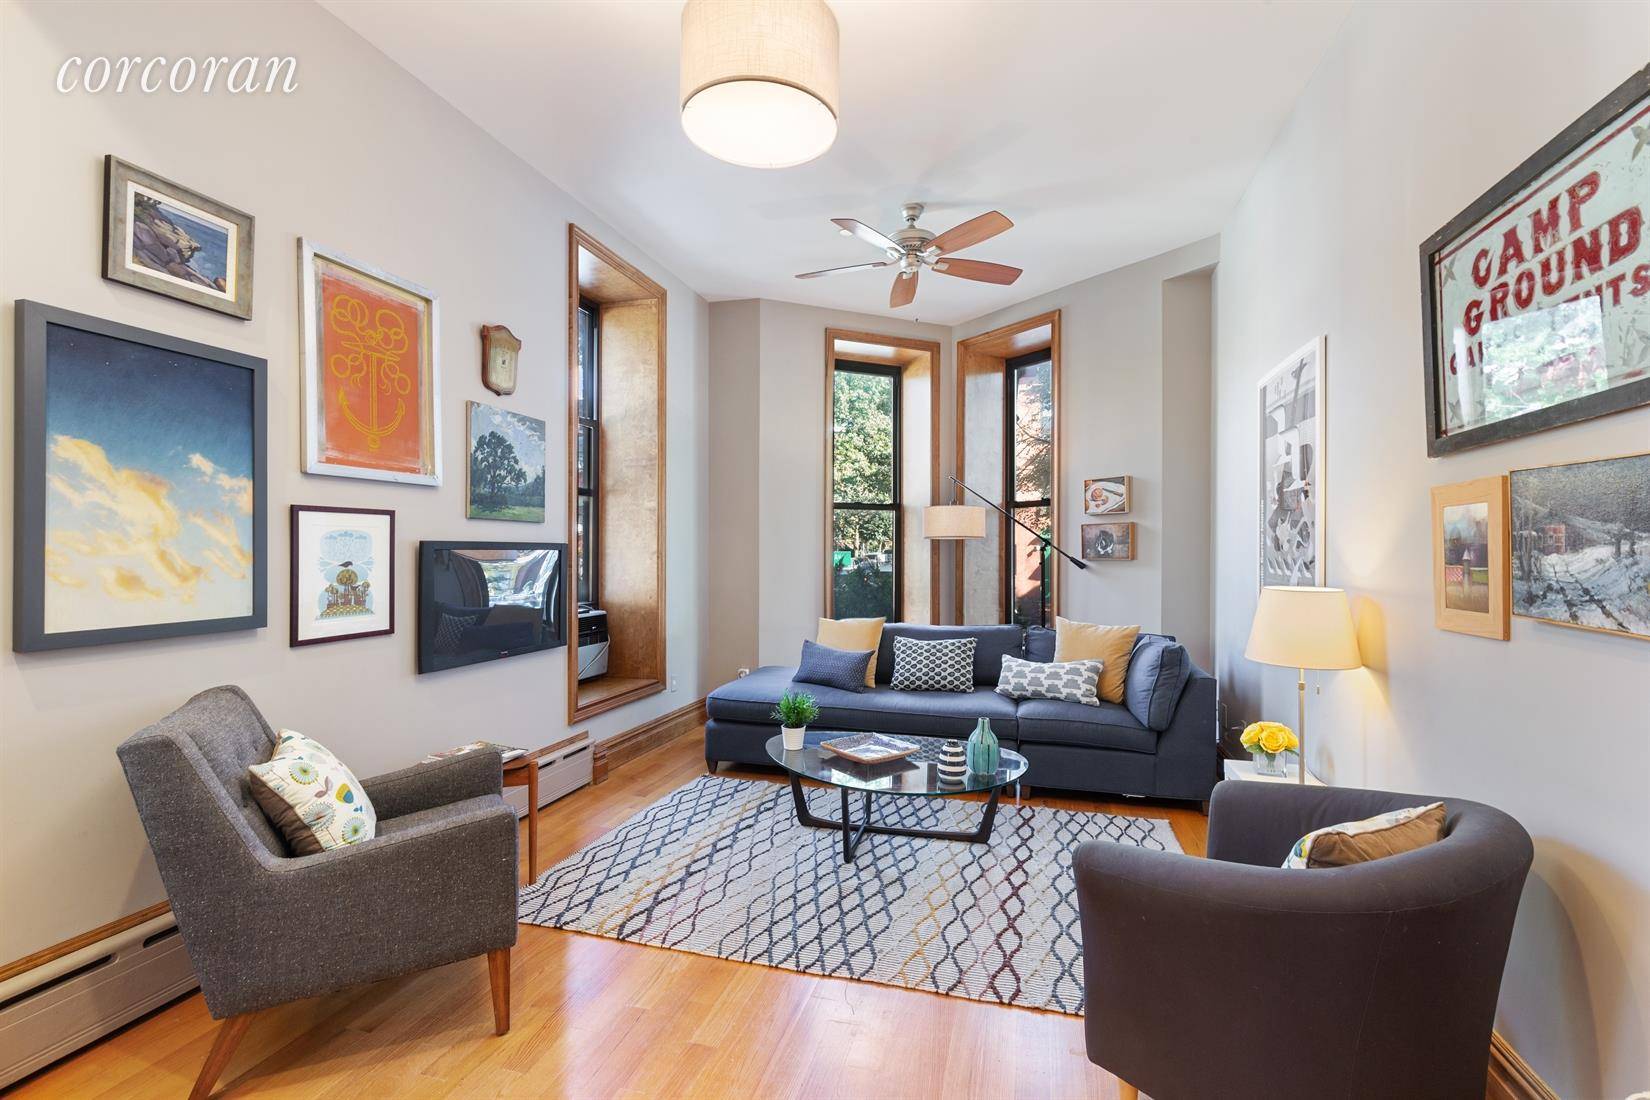 With FOUR exposures, THREE bedrooms, TWO baths, THREE bay windows, TWELVE foot ceilings, and a slice of outdoor space, this Park Slope CONDO won't last long !